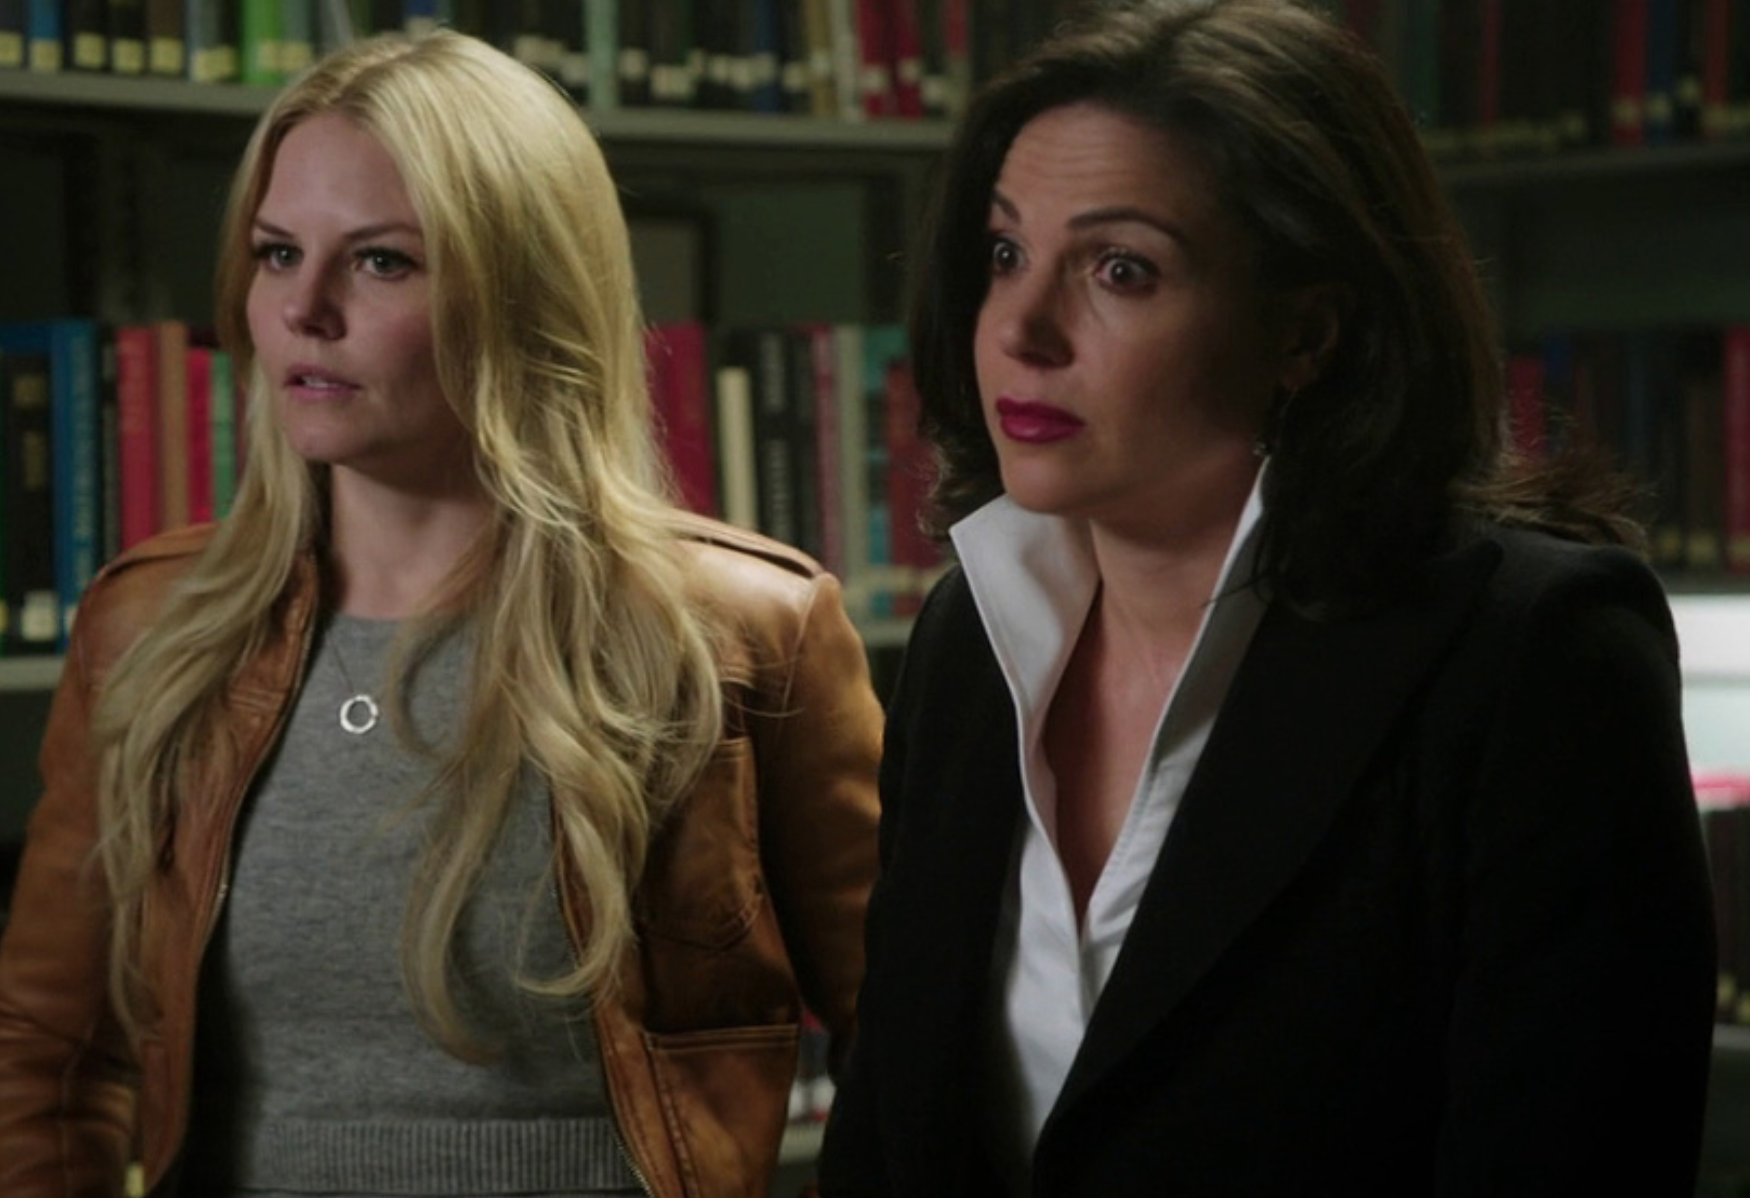 Emma Swan stands with her hands on her hips, and Regina Mills has both eyebrows arched in shock